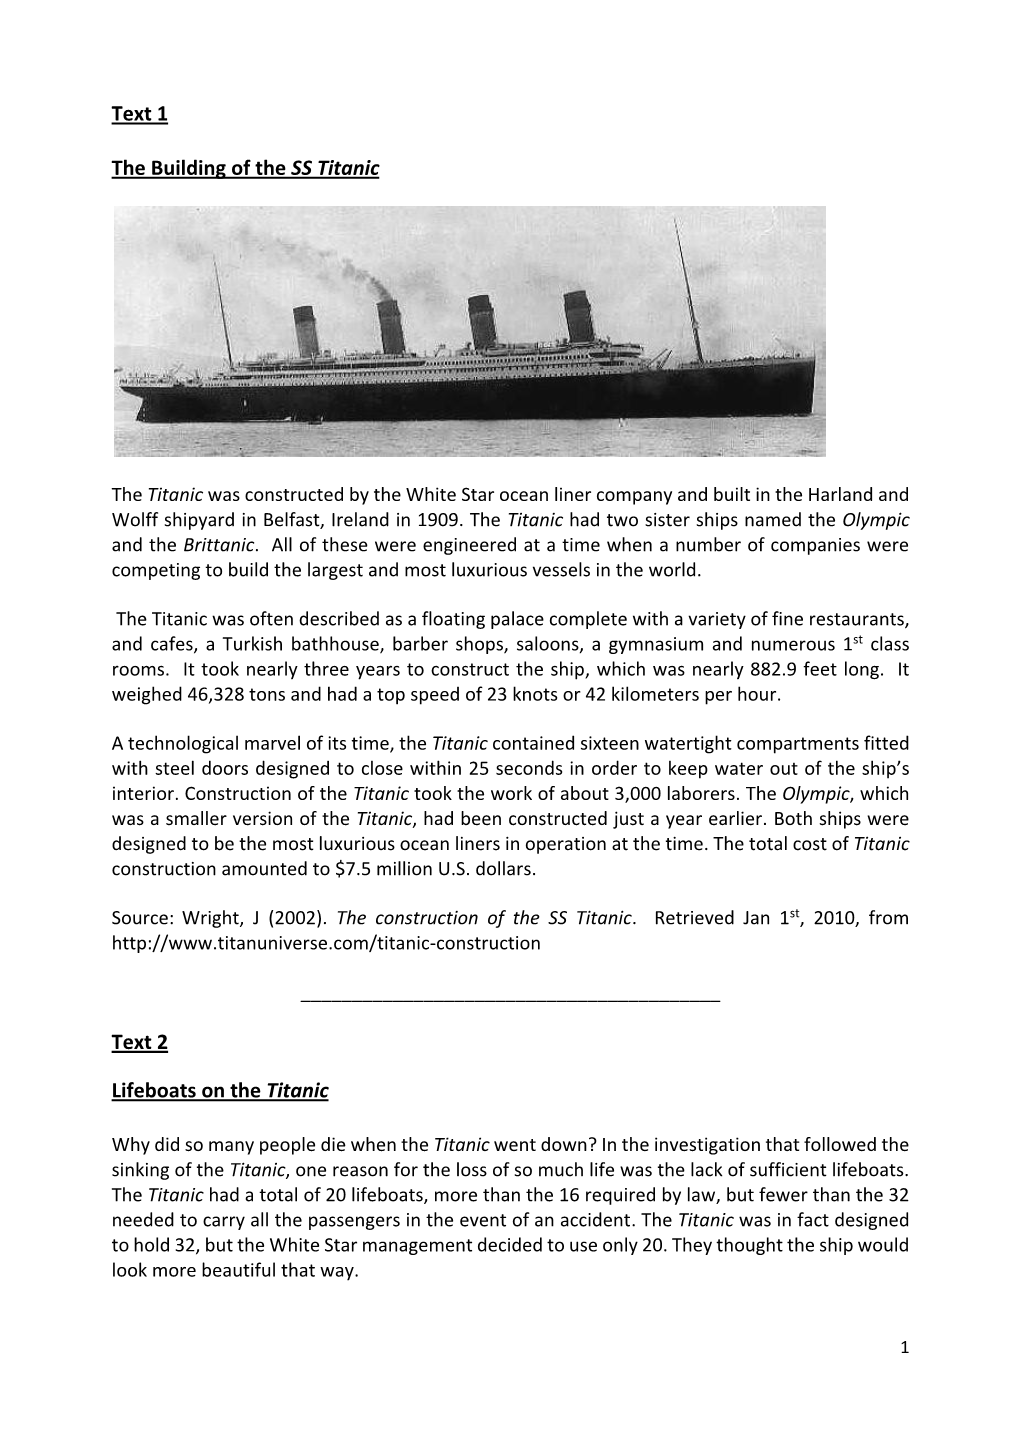 Text 1 the Building of the SS Titanic Text 2 Lifeboats on the Titanic